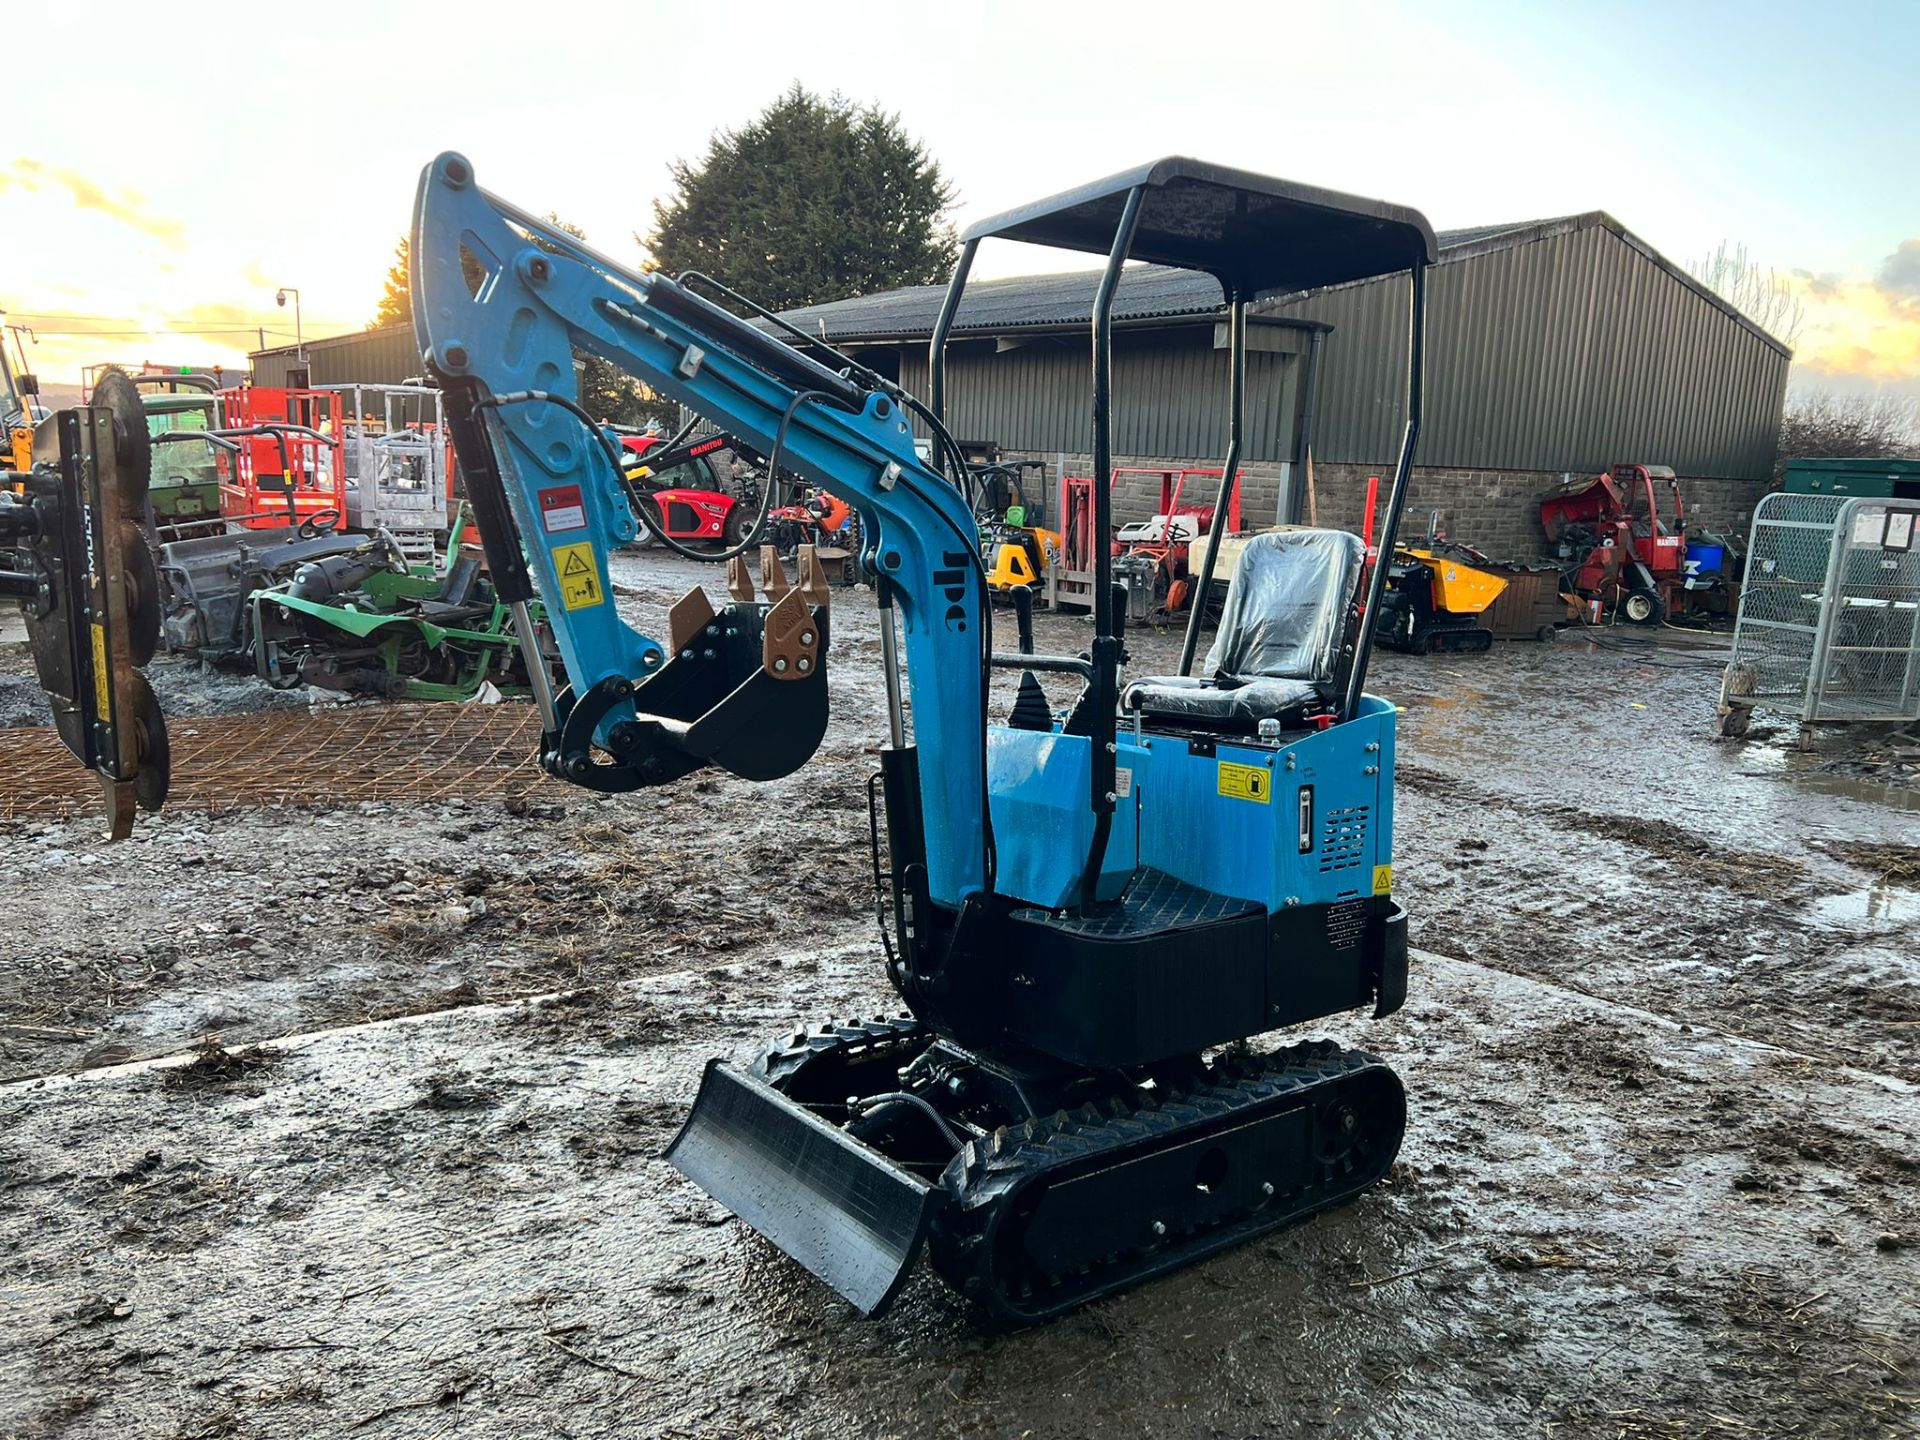 NEW AND UNUSED JPC HT12 1 TON MINI DIGGER, RUNS DRIVES AND DIGS, PIPED FOR FRONT ATTACHMENTS - Image 2 of 11